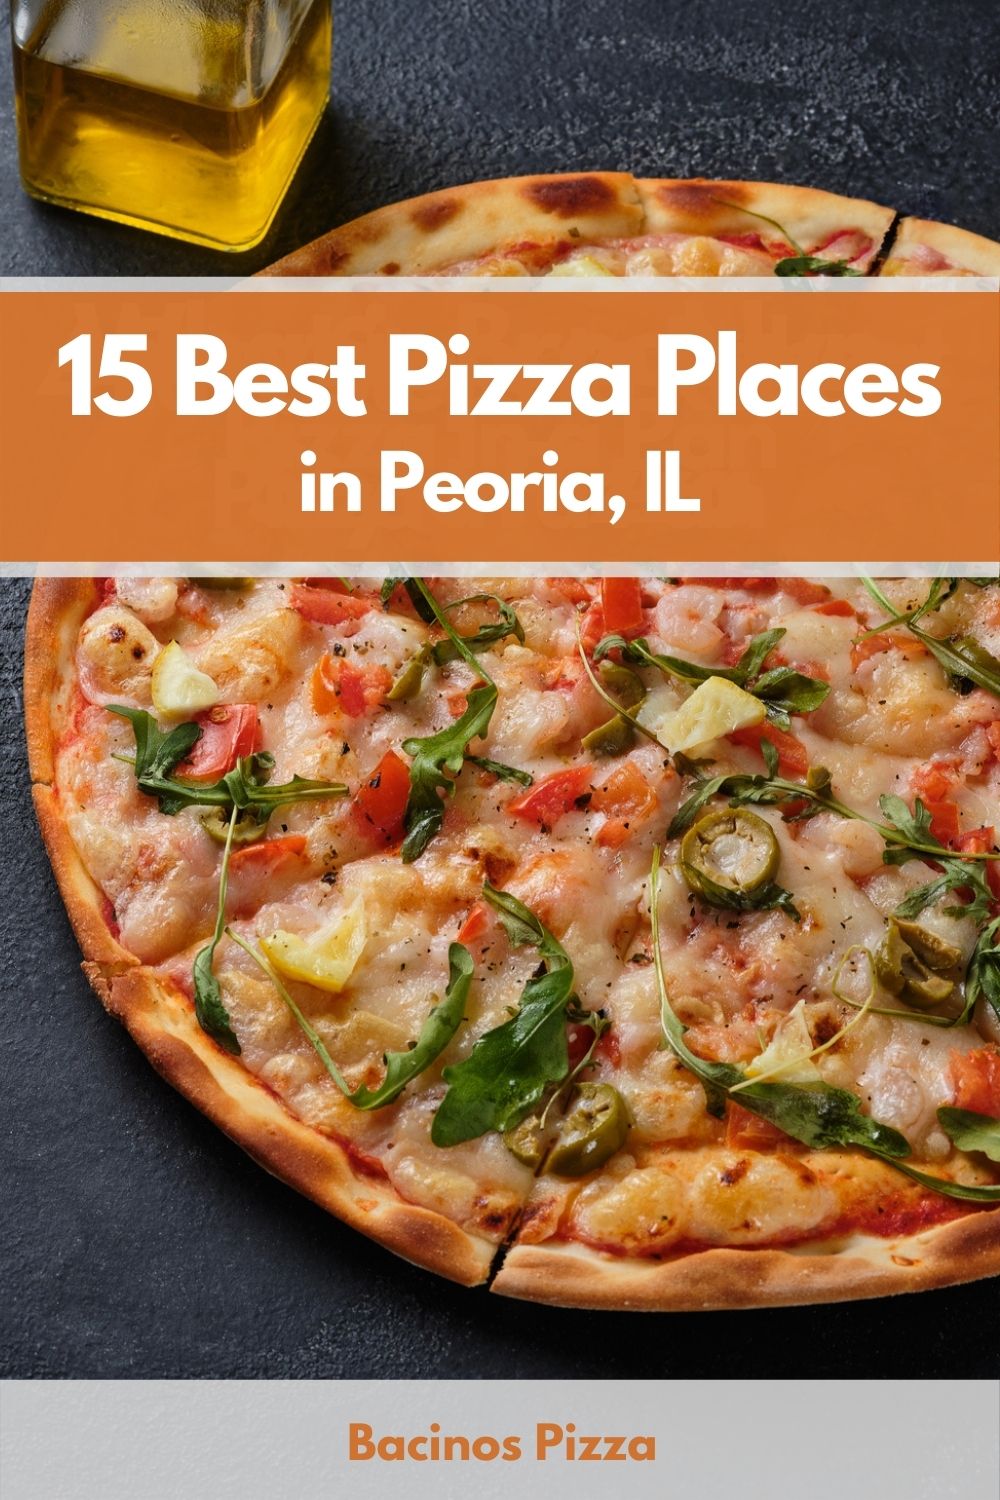 15 Best Pizza Places in Peoria, IL pin